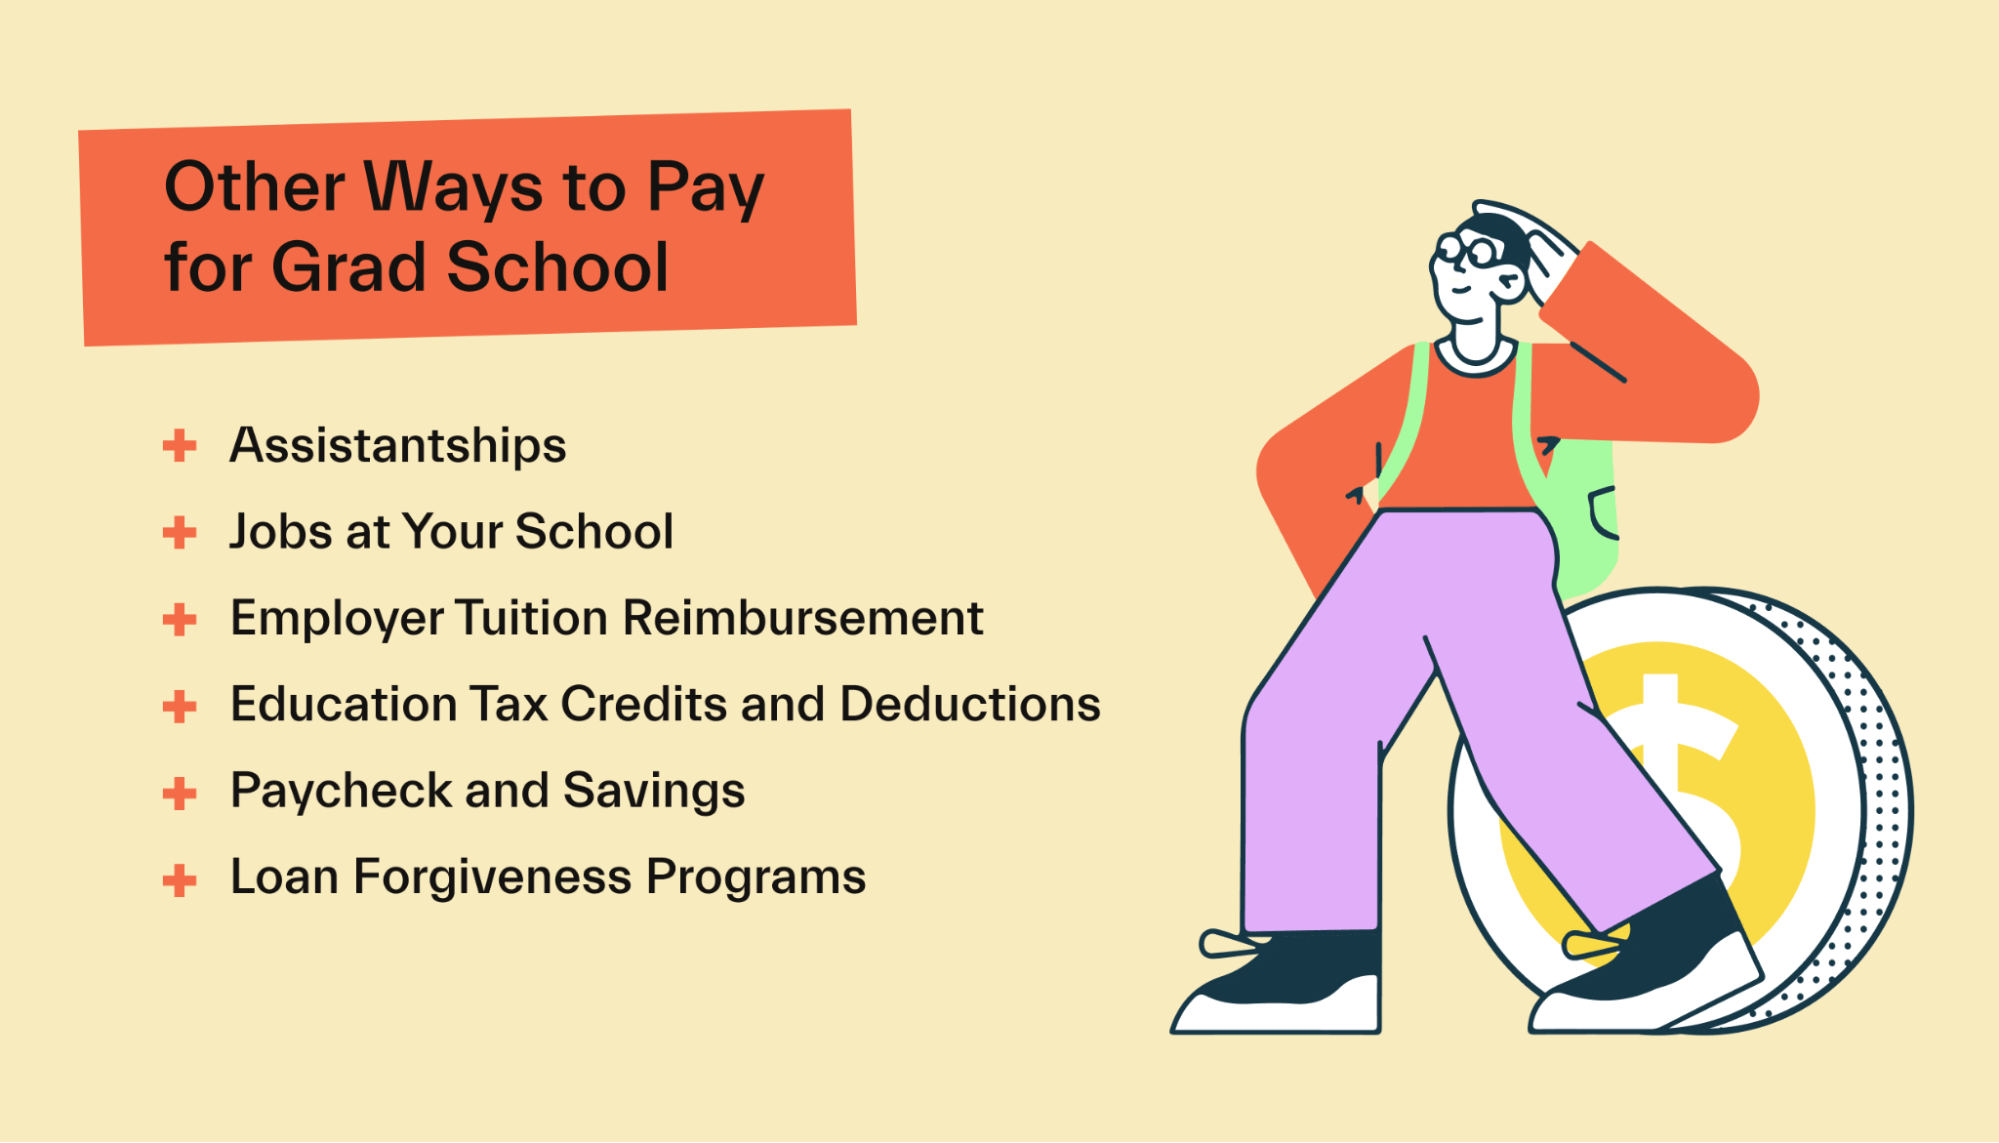 Other Ways to Pay For Grad School